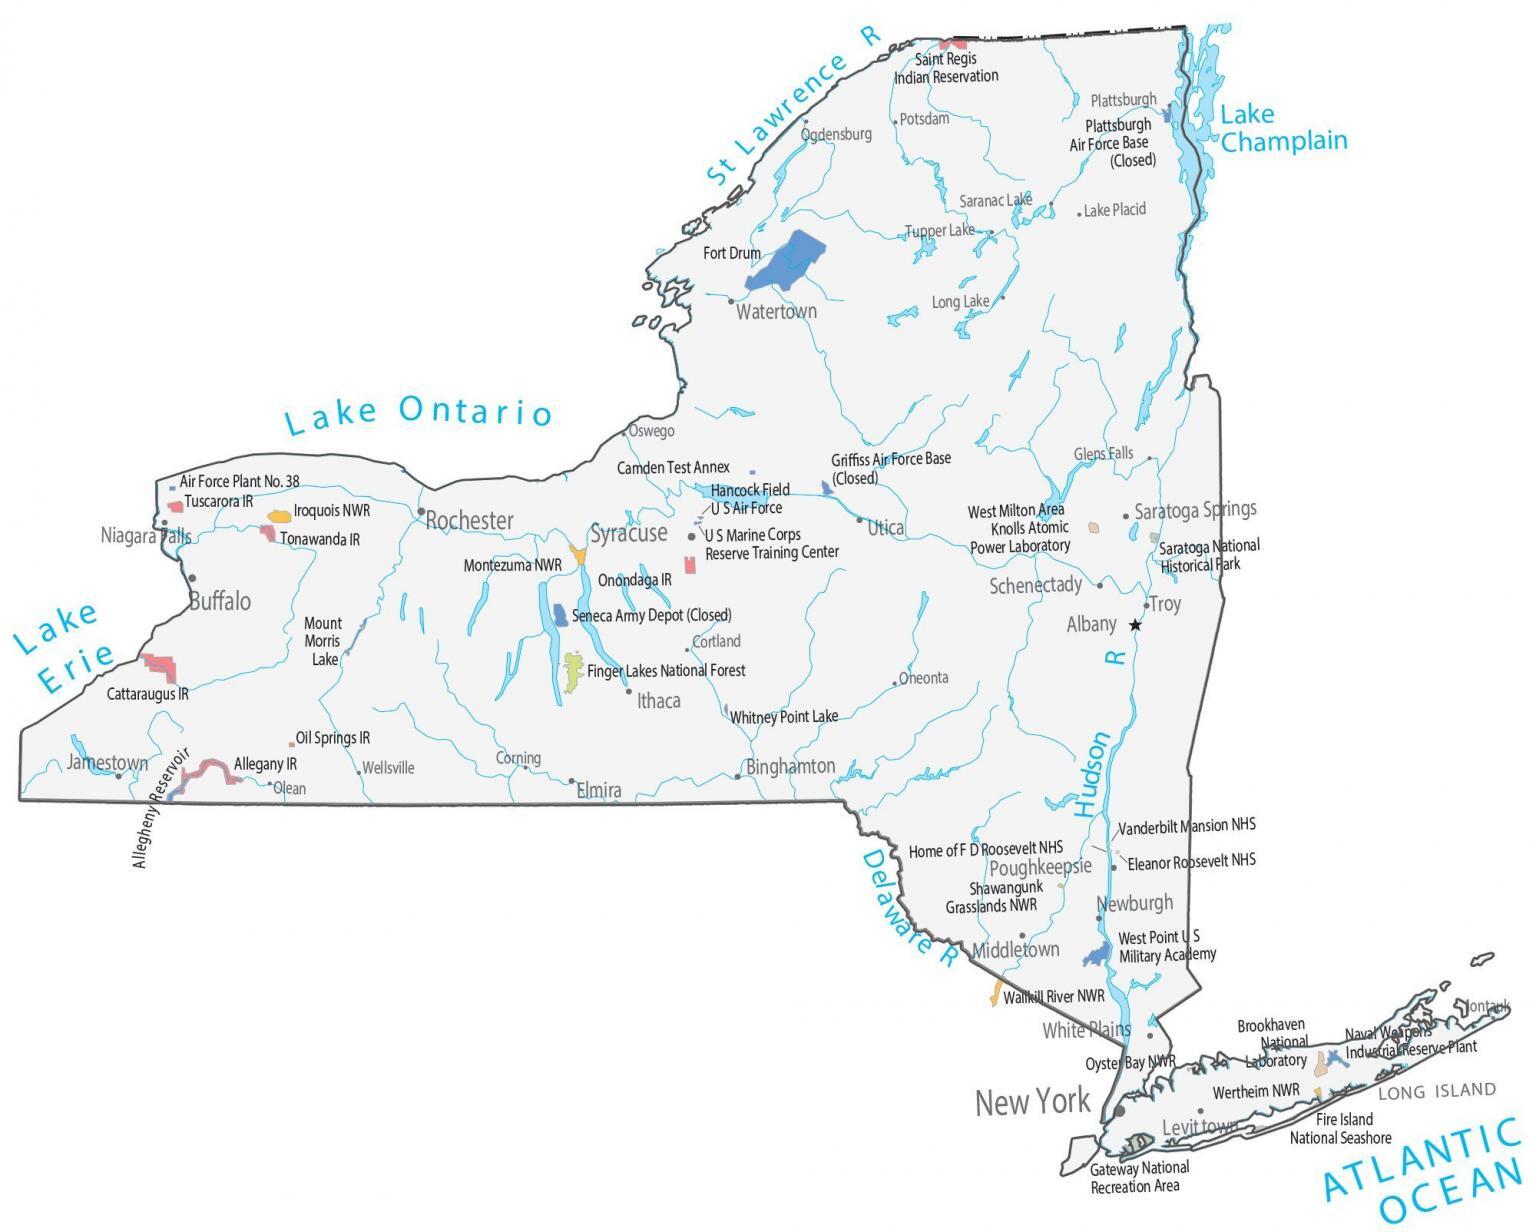 Map of New York - Cities and Roads - GIS Geography